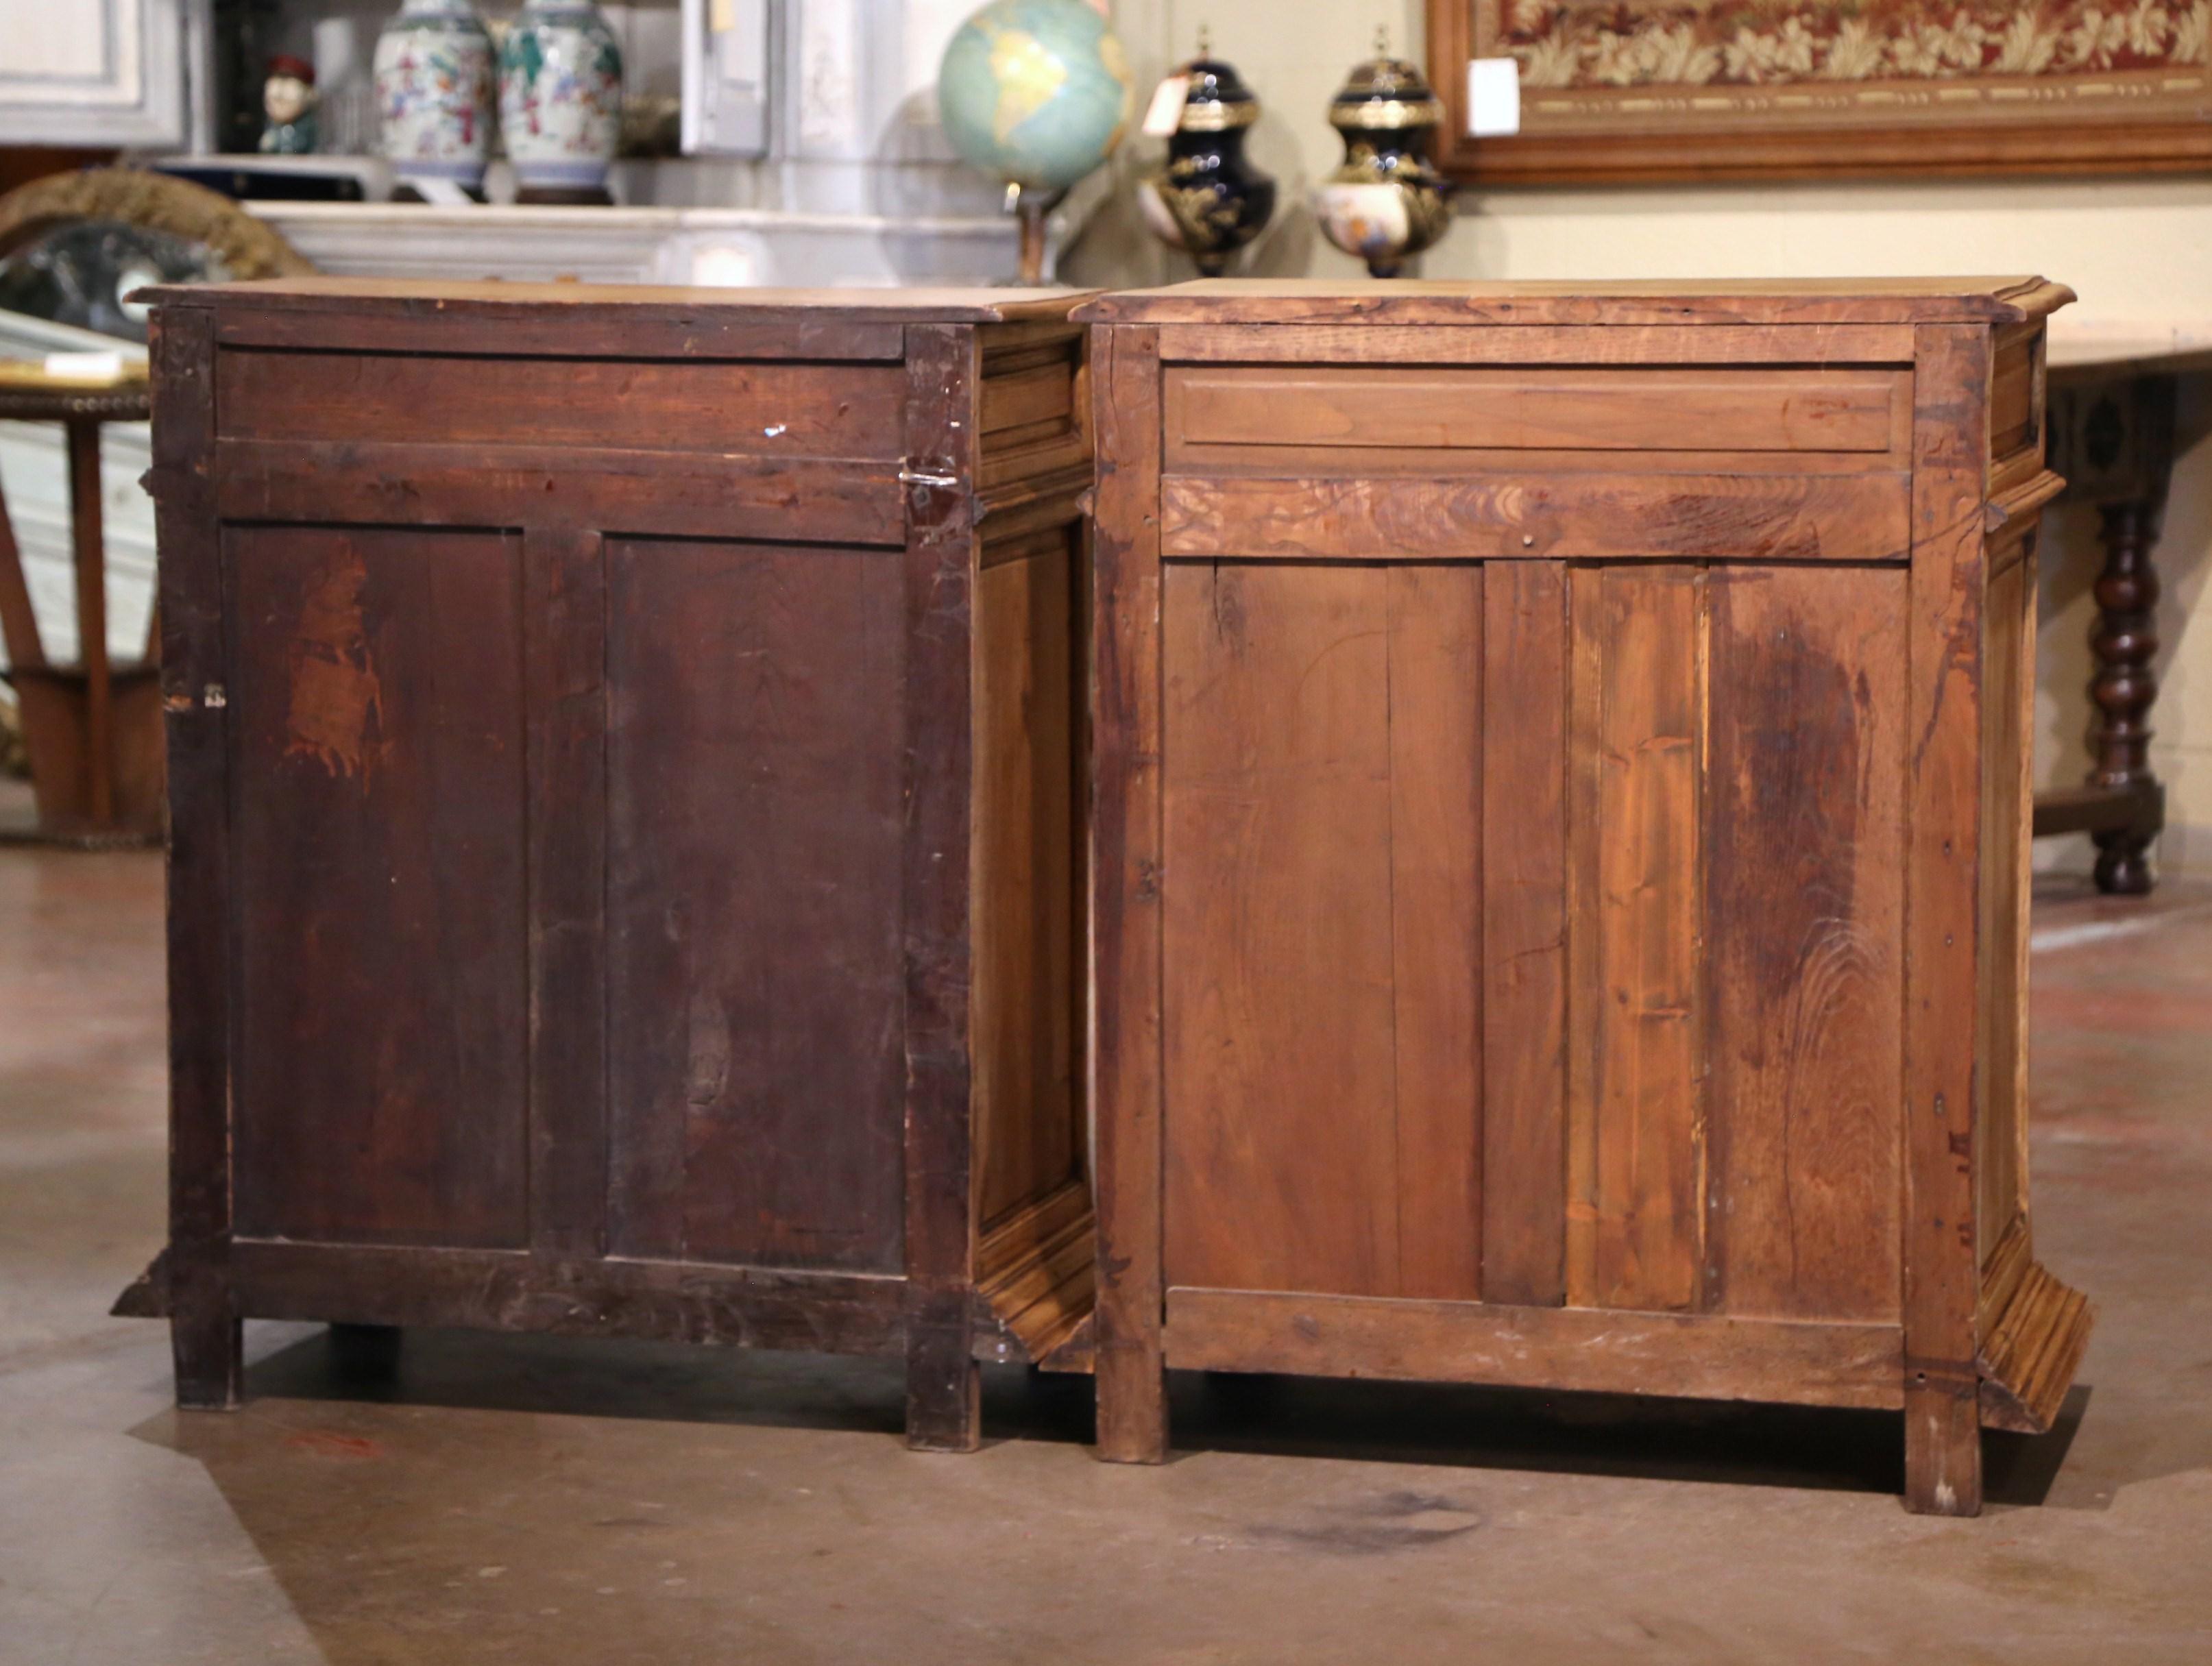  19th Century French Carved Bleached Oak Cabinets from Brittany, Set of Two For Sale 14